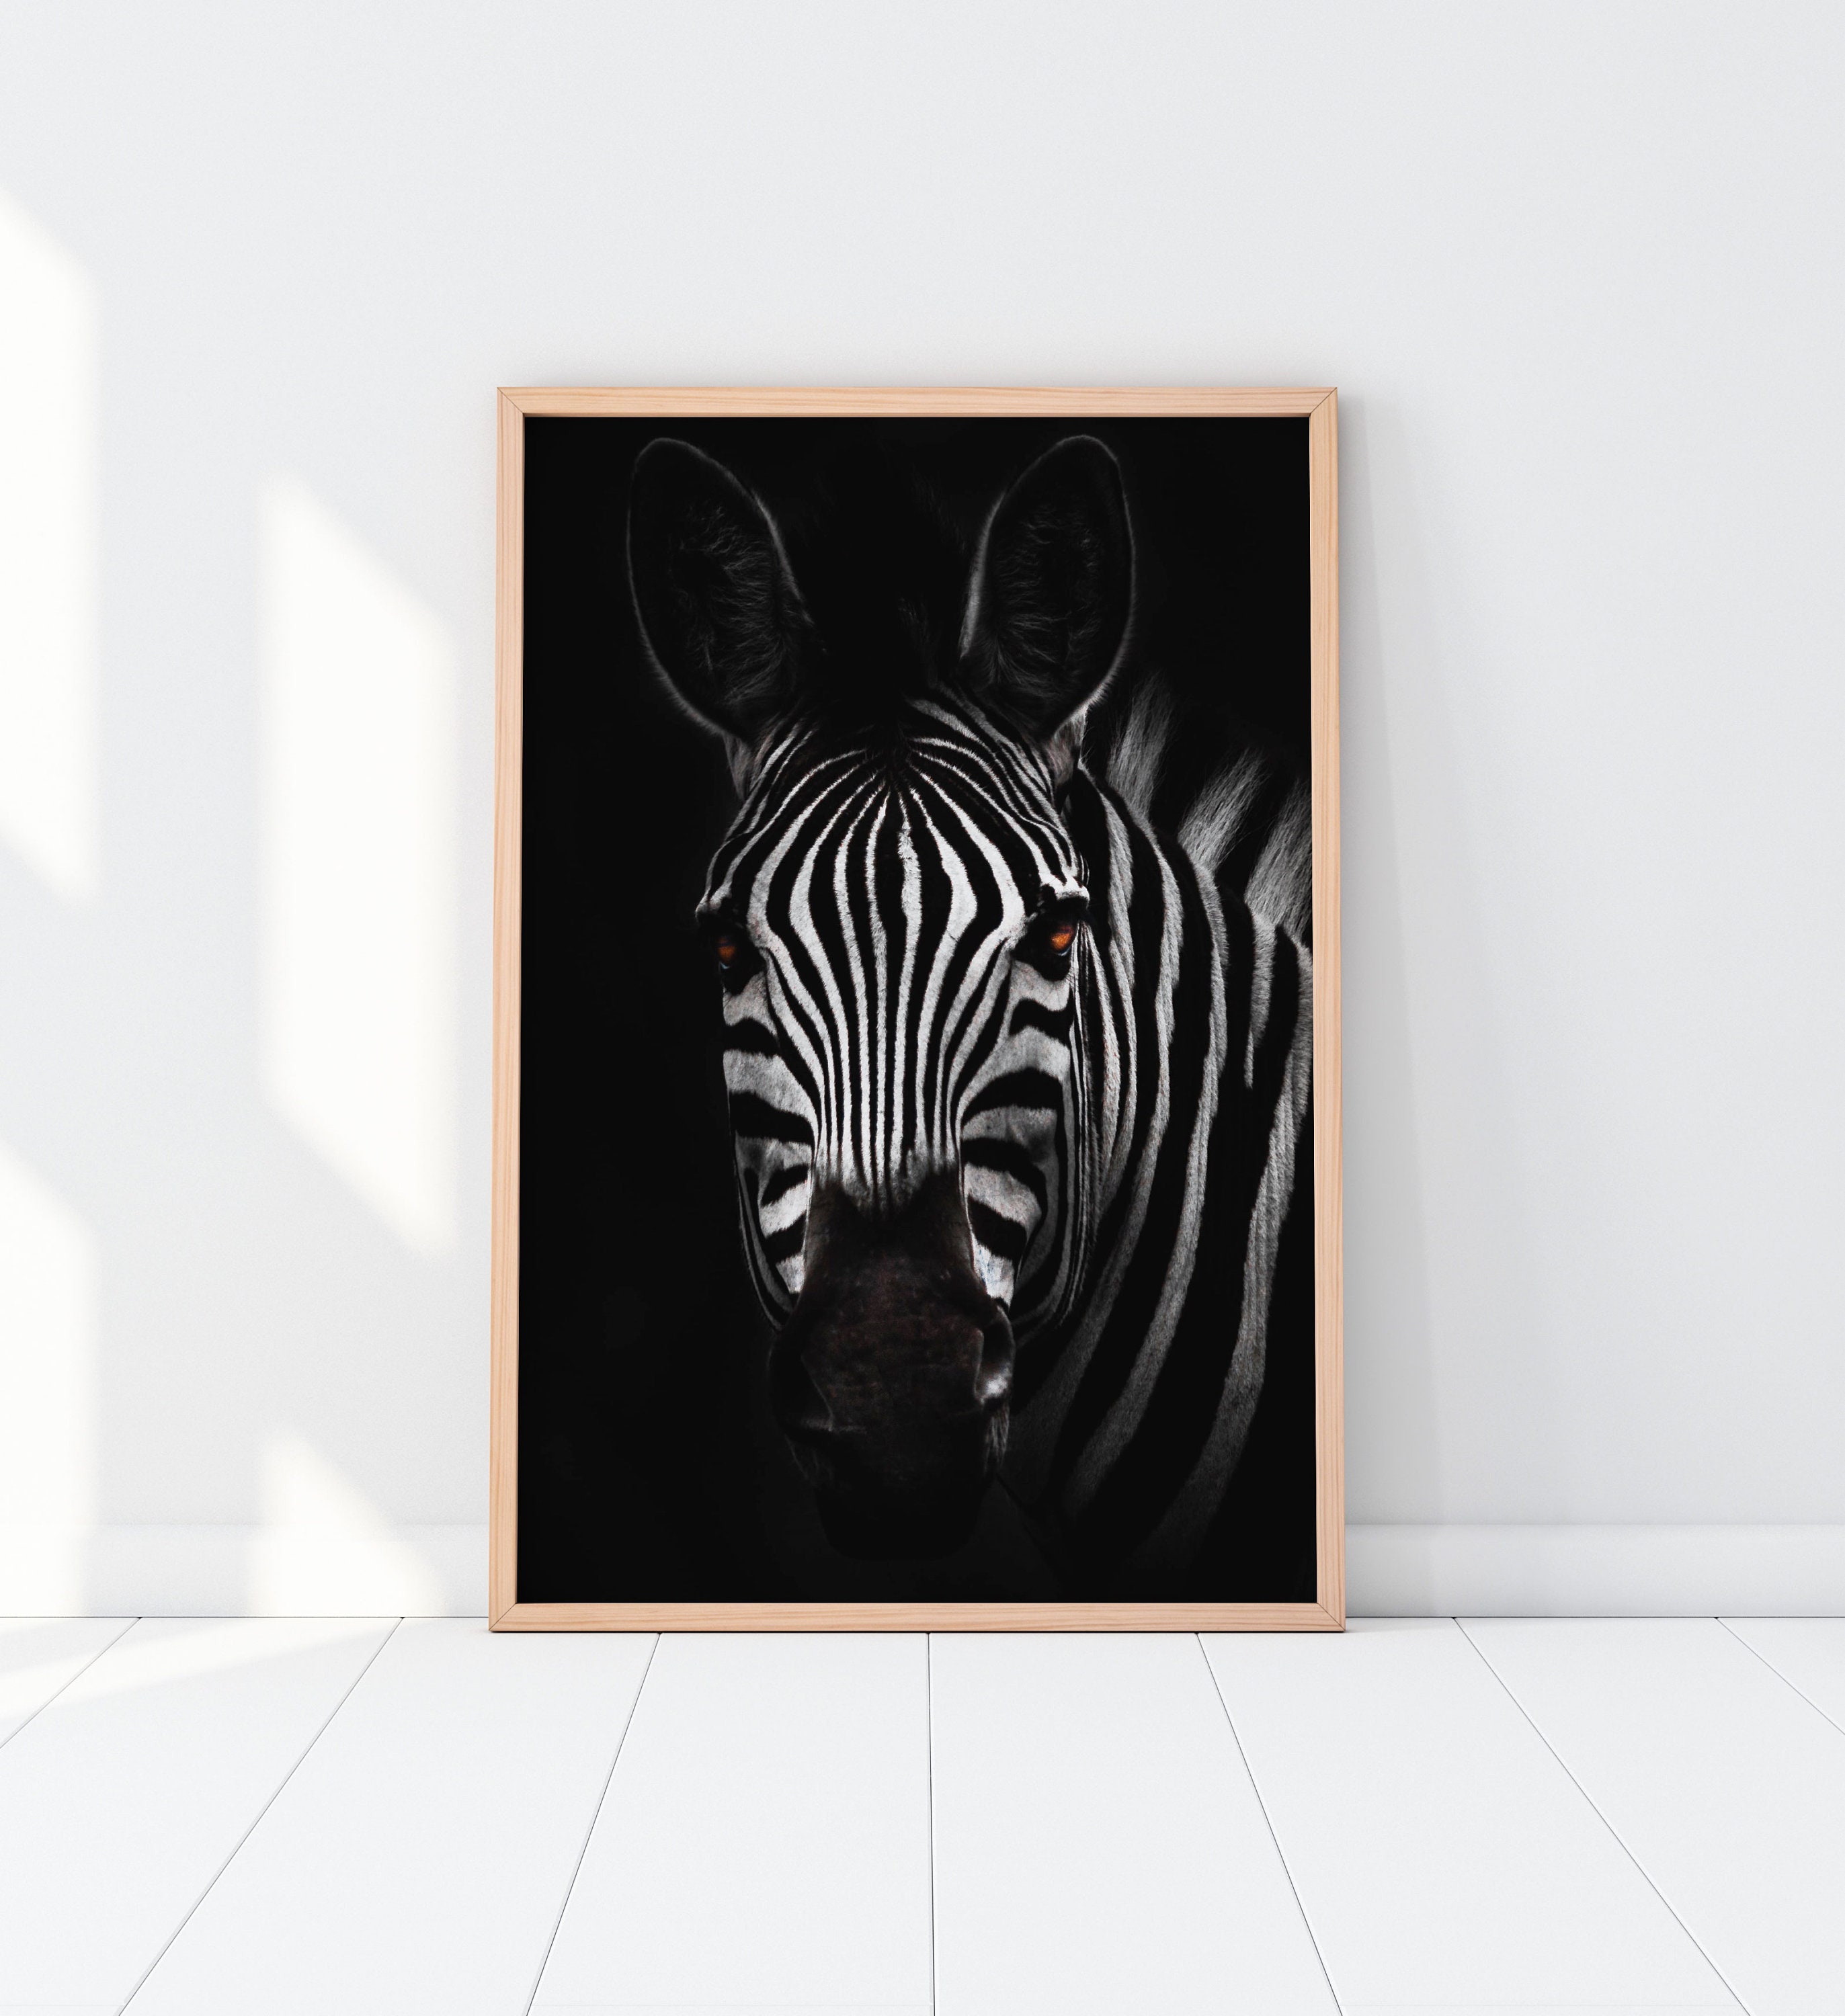 Leopard Zebra Black White Animal Poster Abstract Canvas Print Wall Art Picture 